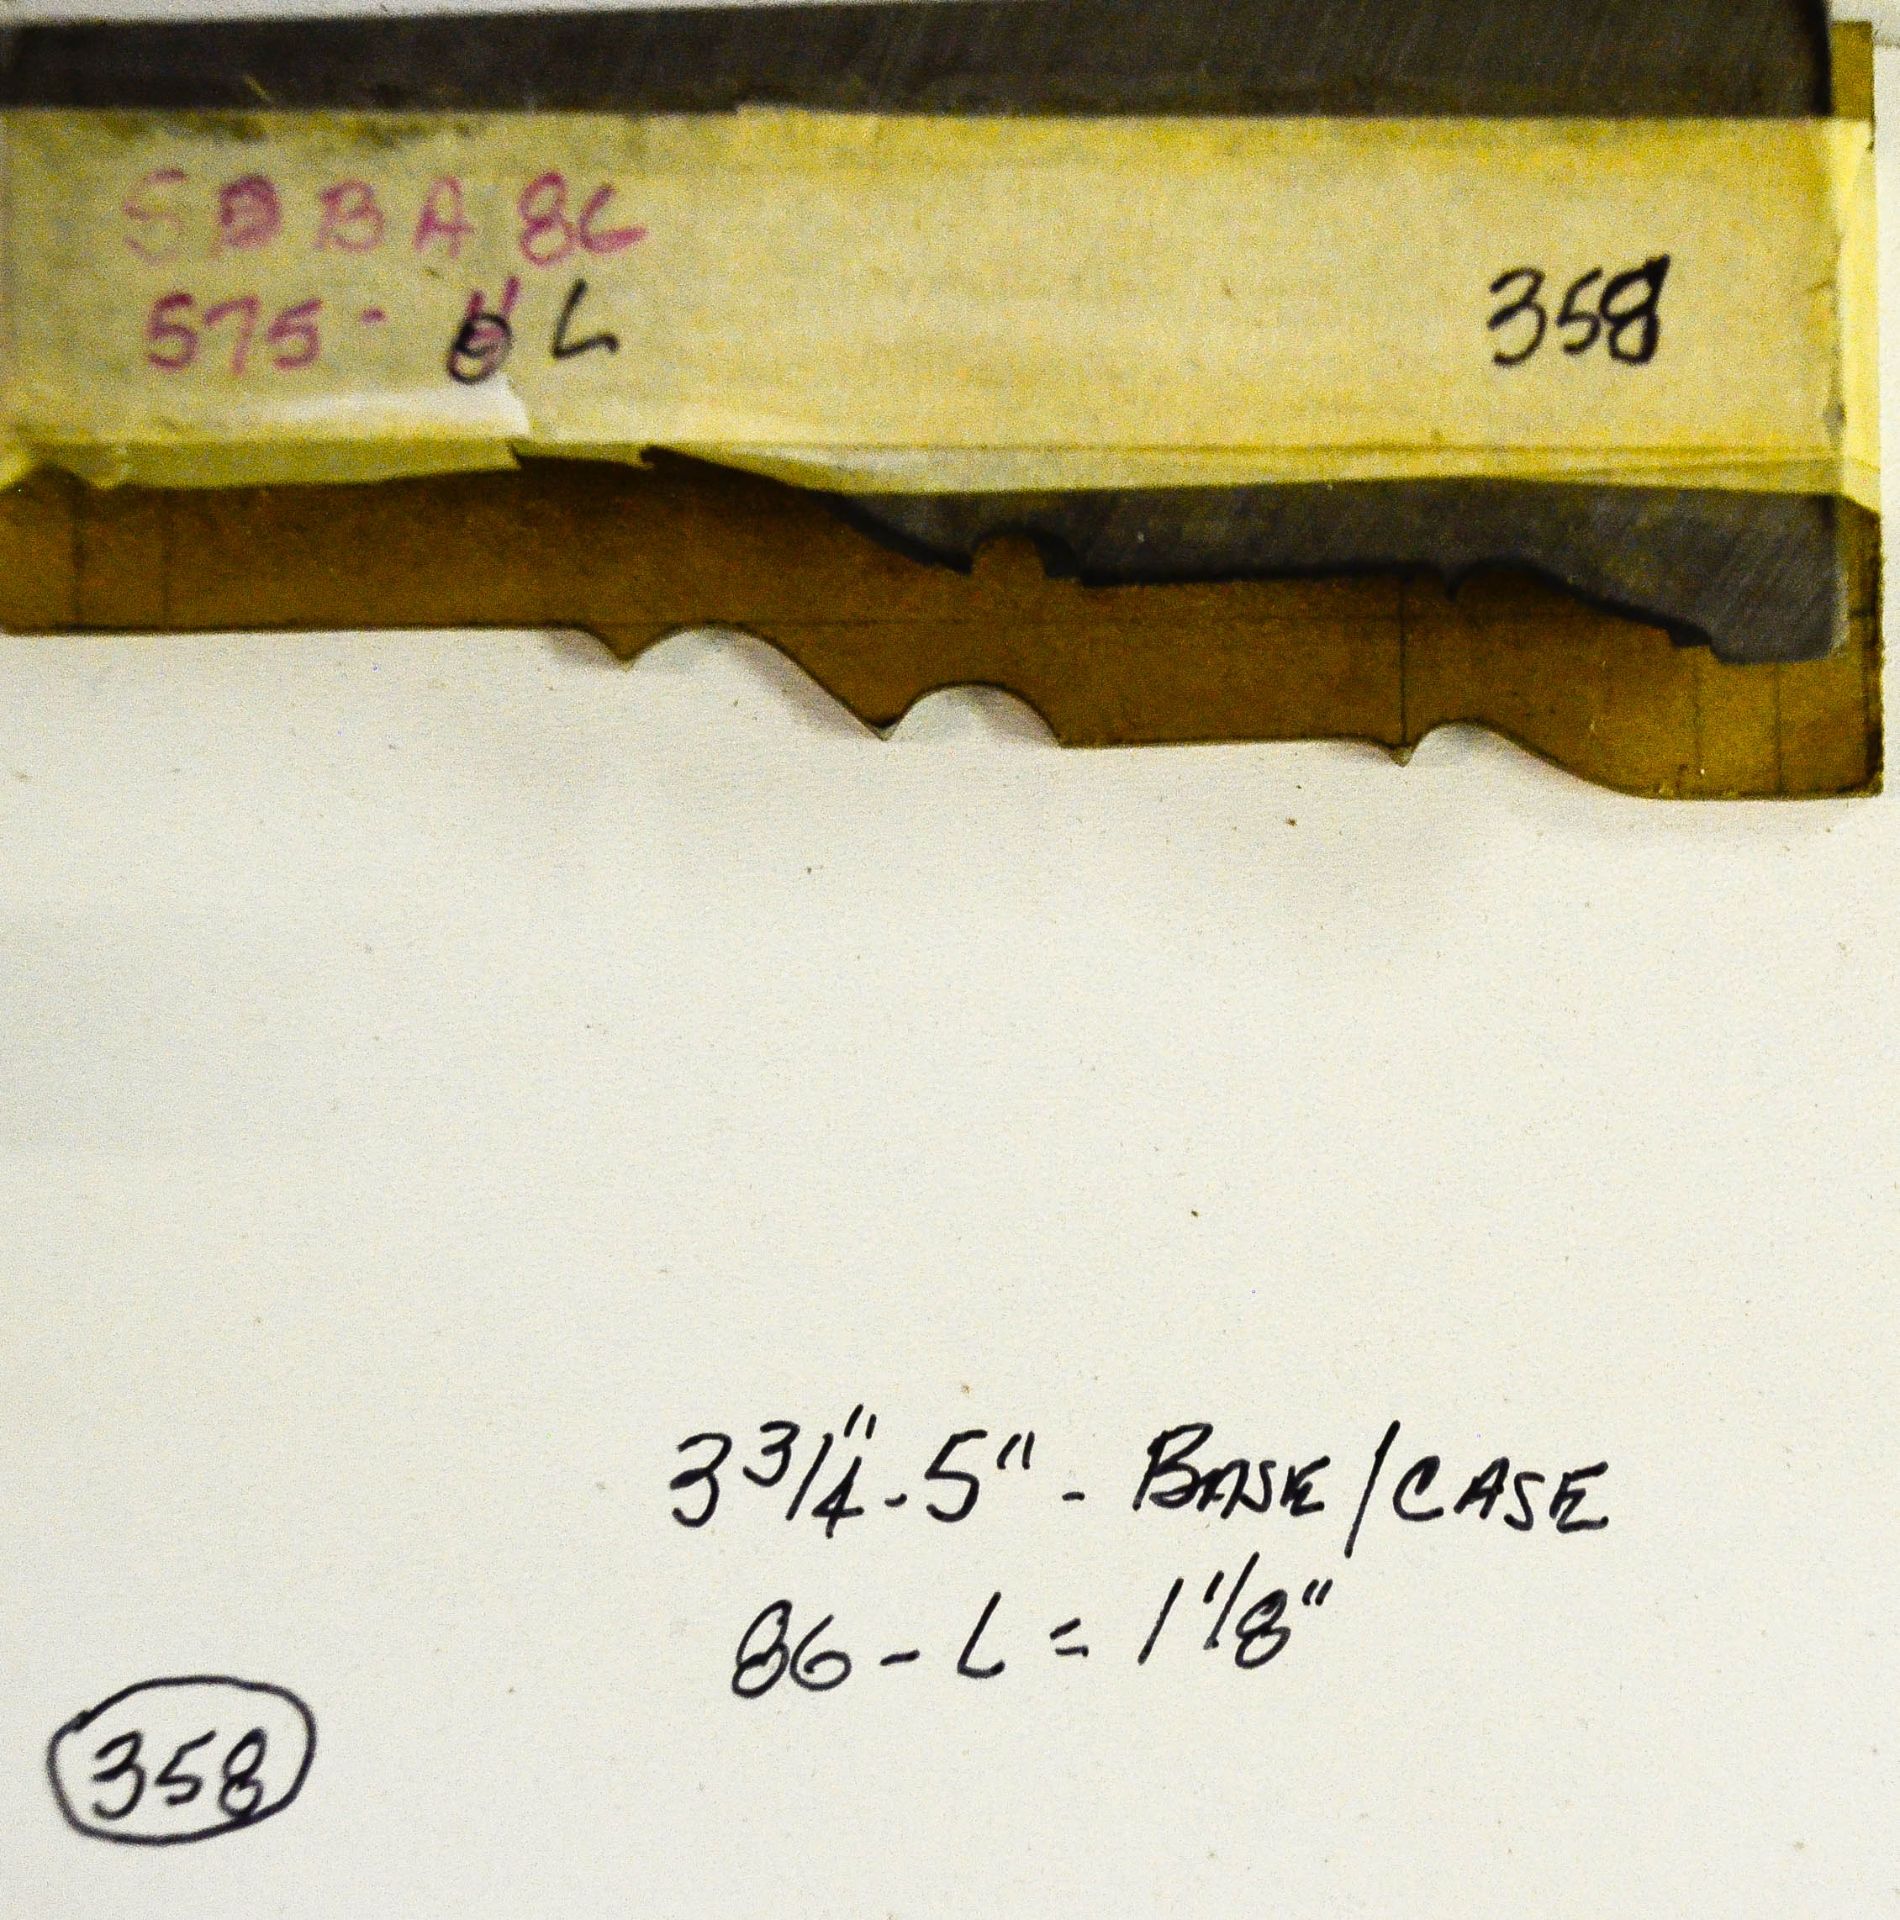 Moulding Knives, 3-3/4"- 5" Base/Case, 86 - L = 1-1/8", Dull, Knives are in Good Condition and R